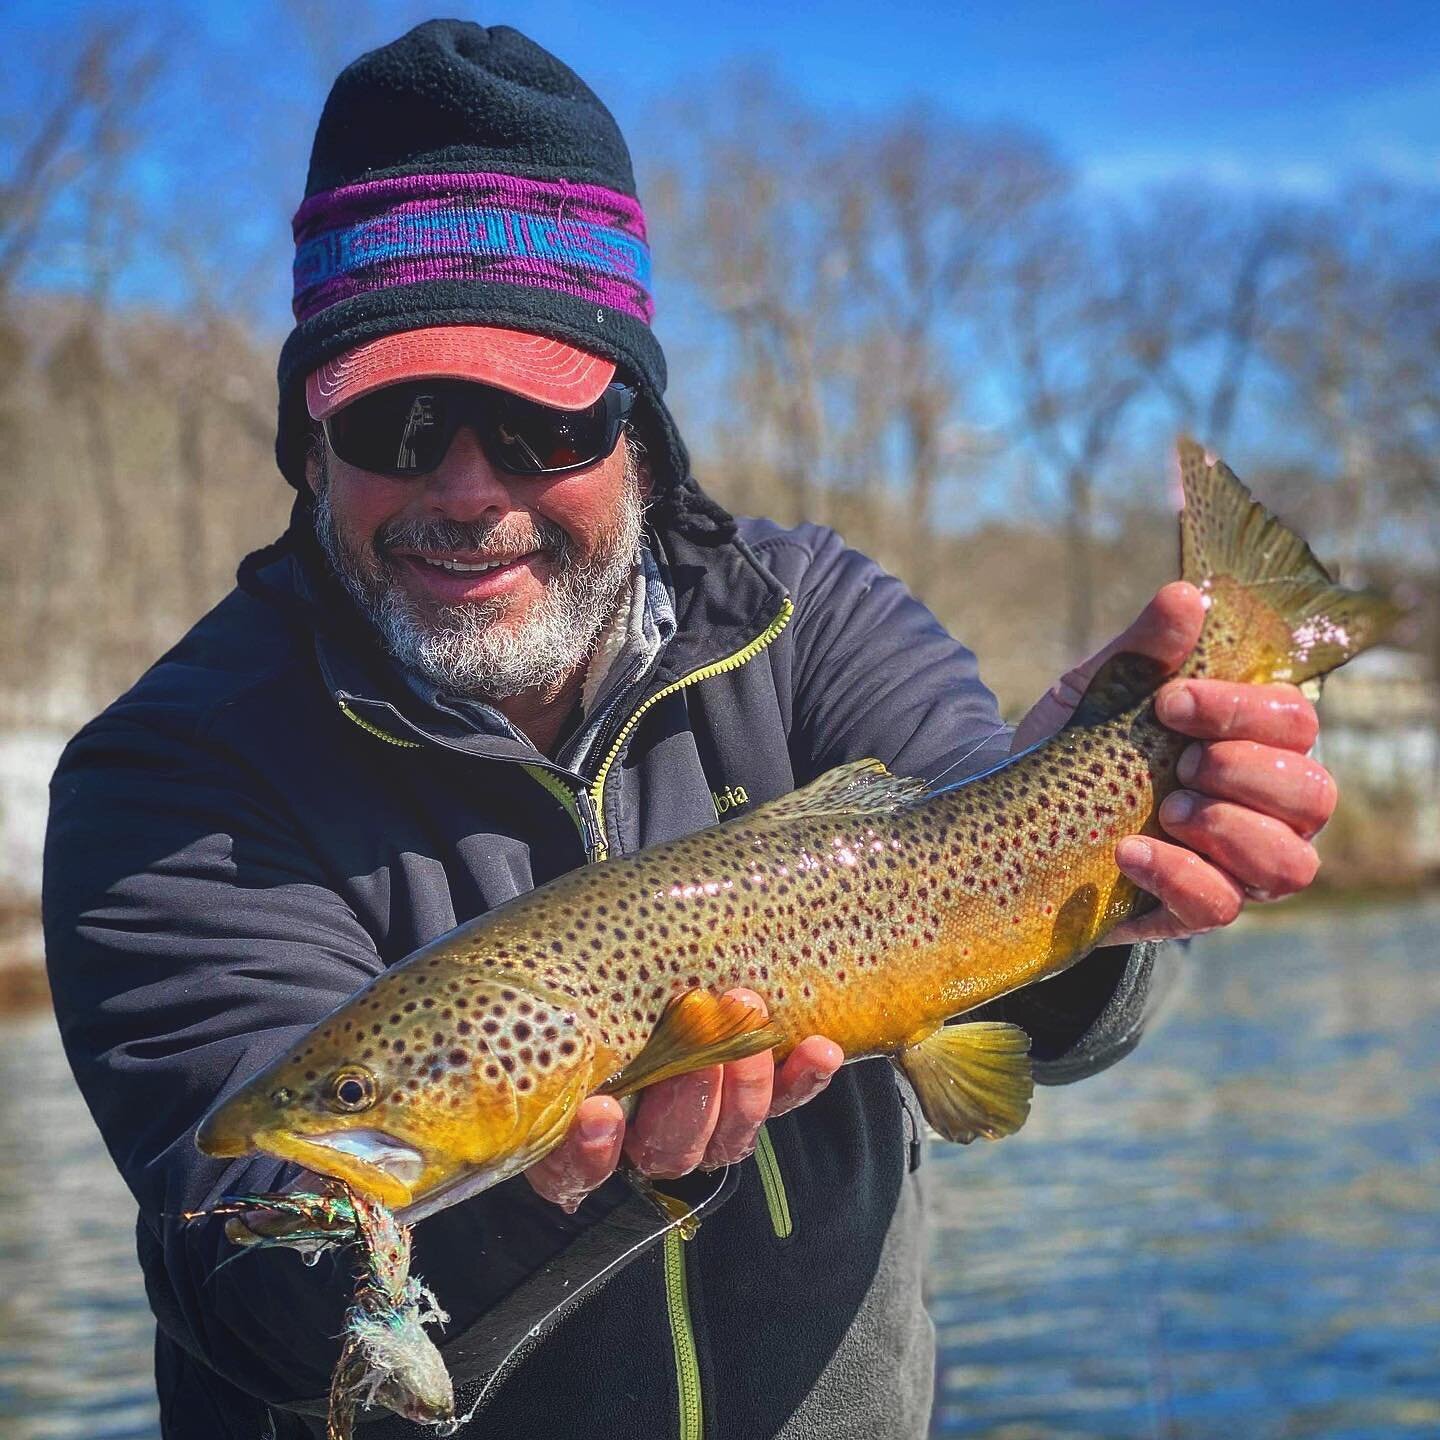 Commitment is all I have to say about the 4 days of streamer fishing we did during the brutal winter storms. We sure put some nice fish to the net @andrewthomascimis!
&bull;
&bull;
@riffletrip_outfitters 
&bull;
&bull;
#riffletripoutfitters #scottfly